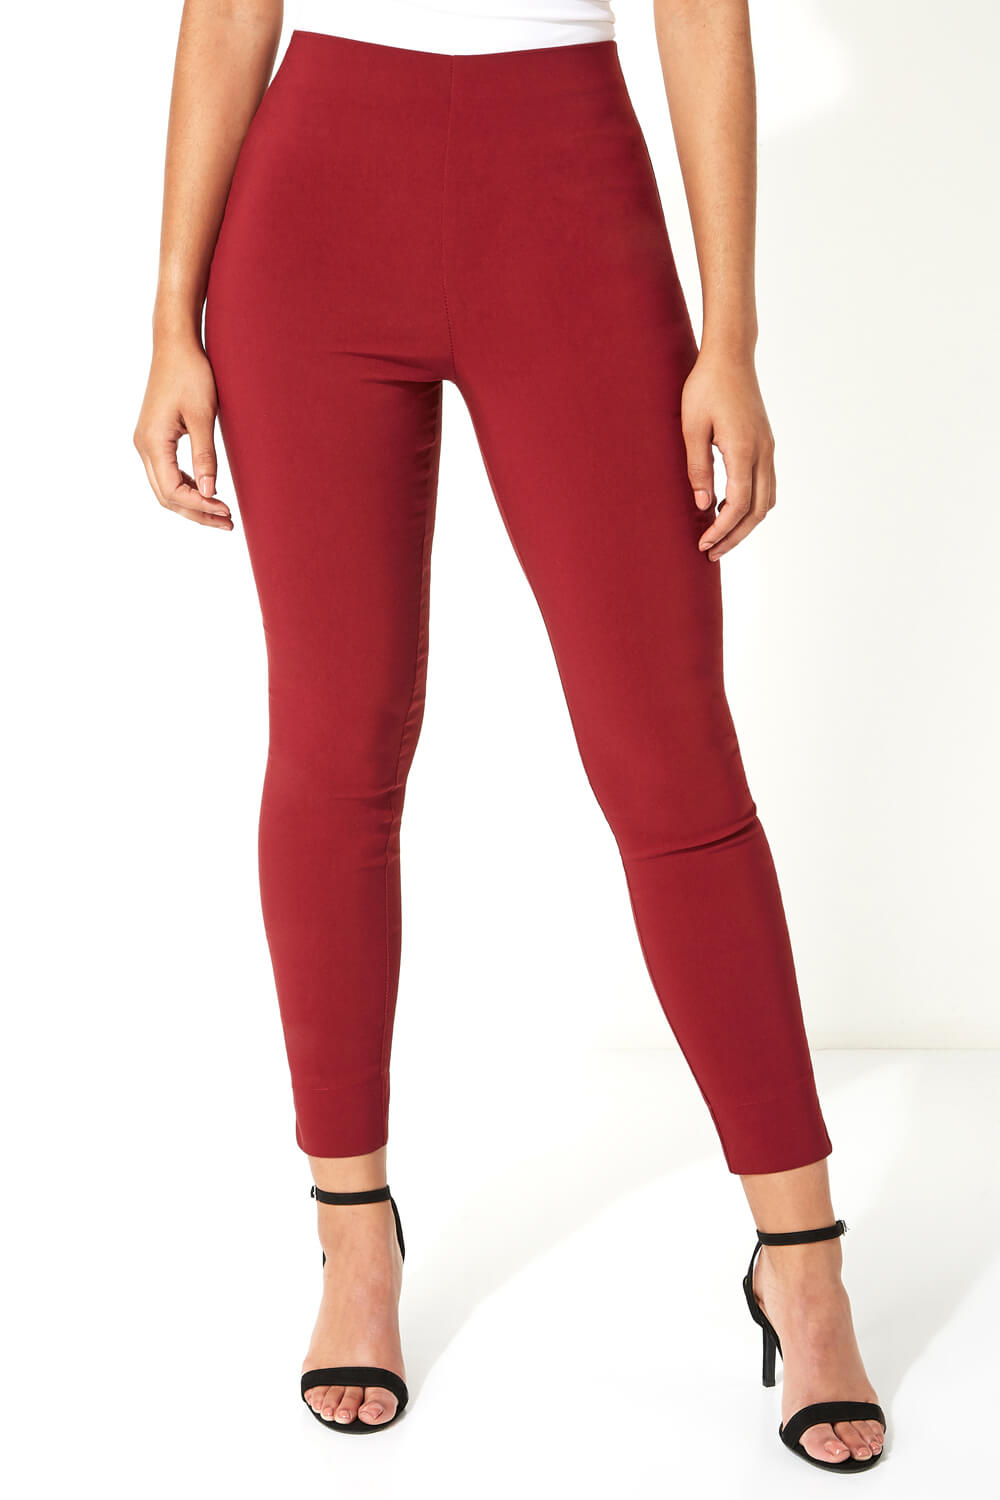 Red Full Length Stretch Trousers, Image 2 of 5